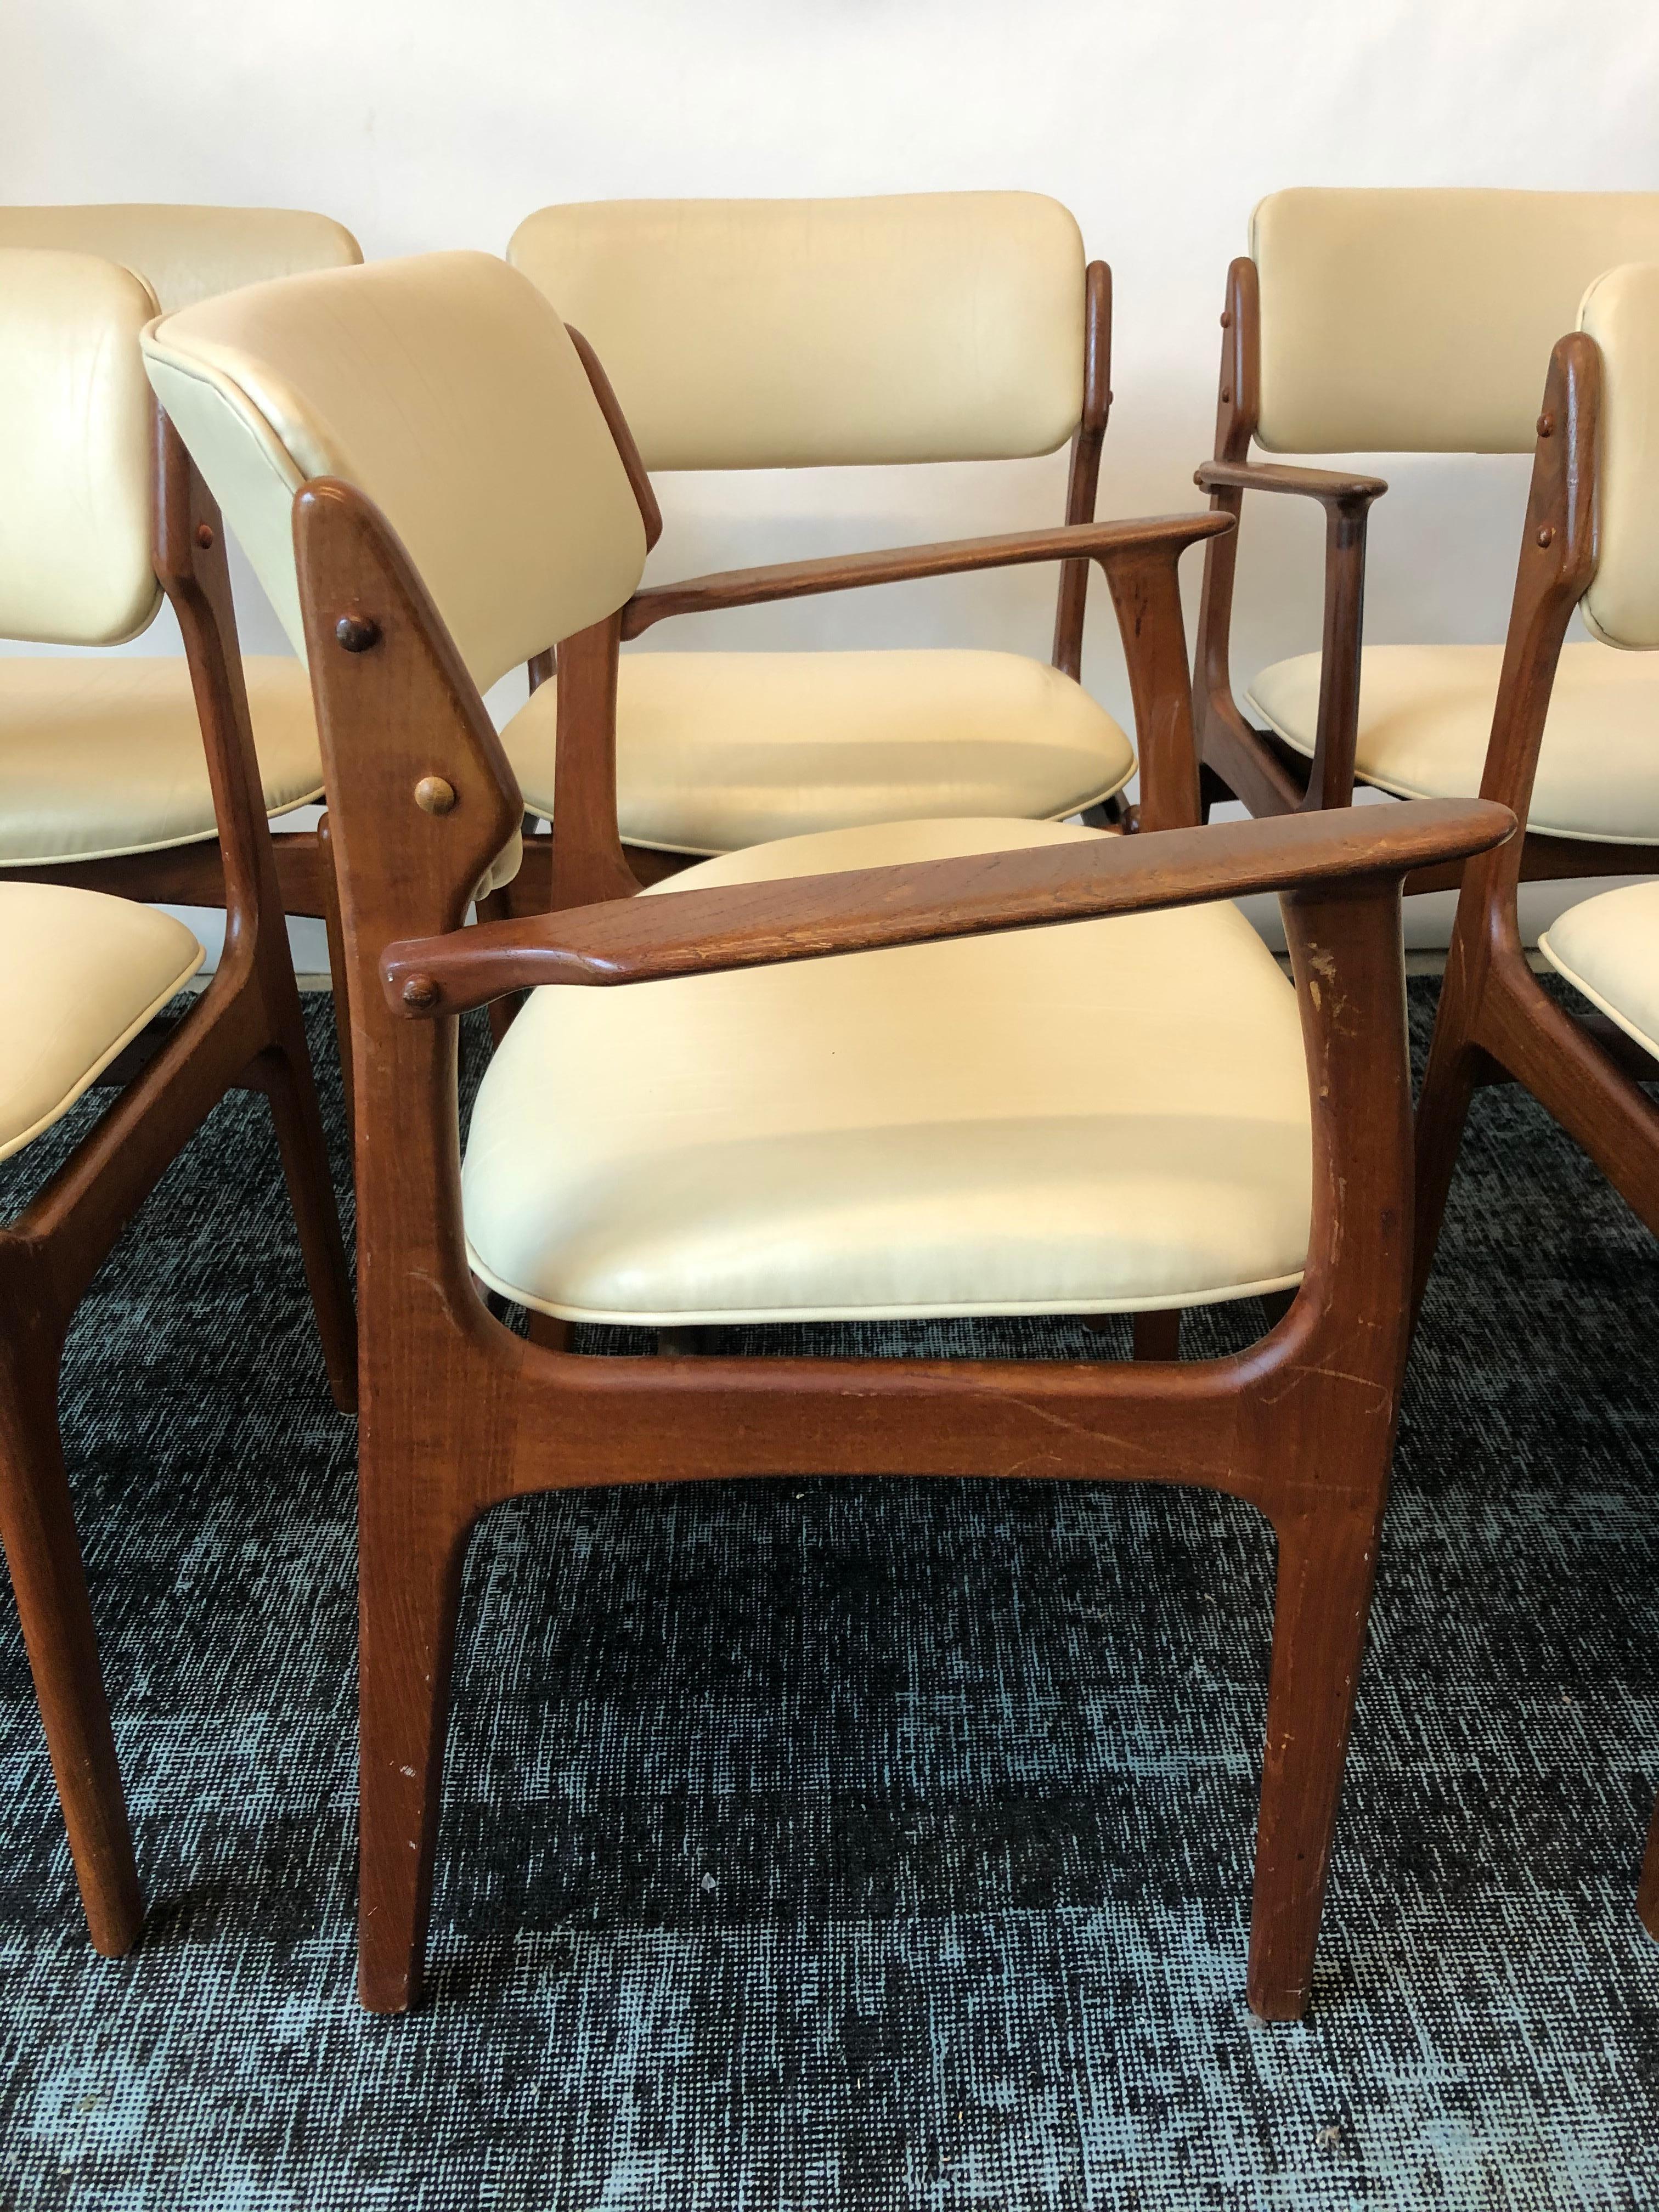 Vintage Danish Modern Teak Set of Six Dining Chairs by Erik Buch for O.D. Møbler 1